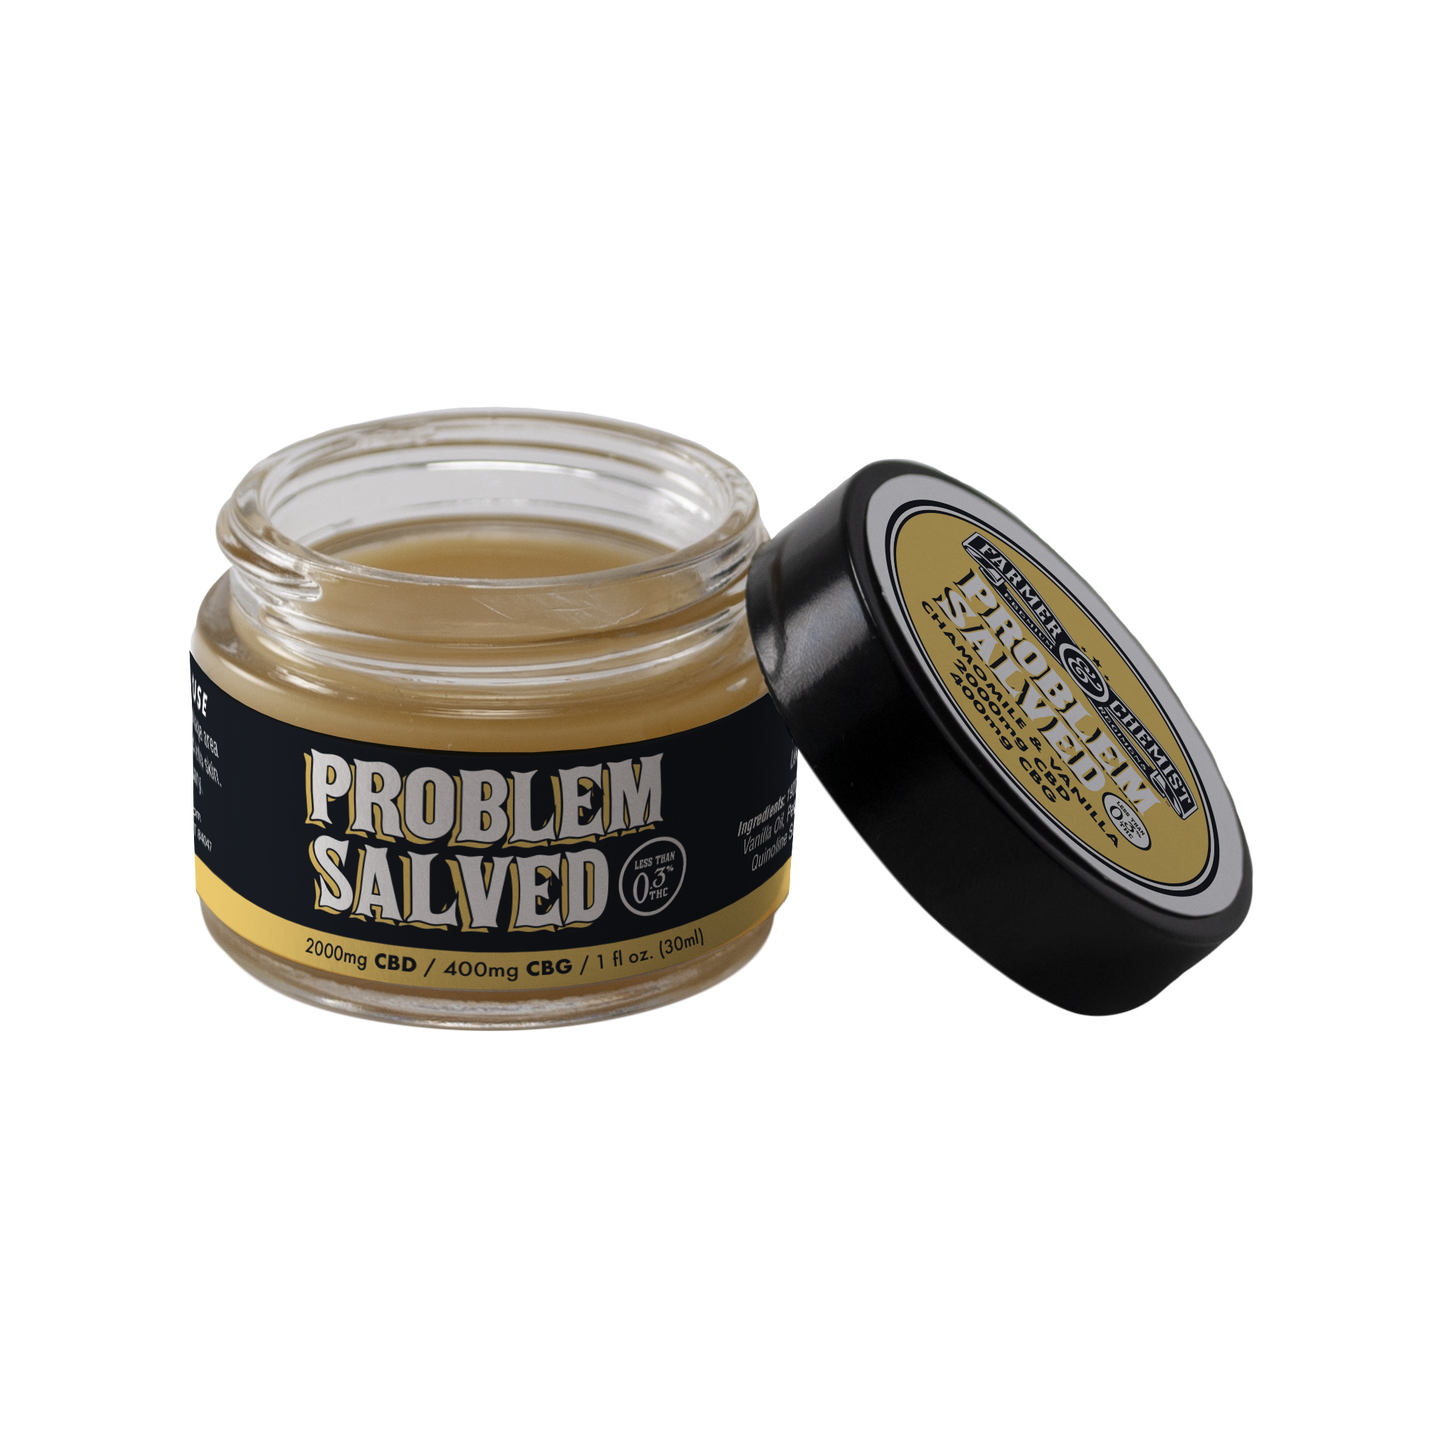 PROBLEM SALVED - 1oz. 2000mg with Chamomile and Vanilla (Case pack of 4)